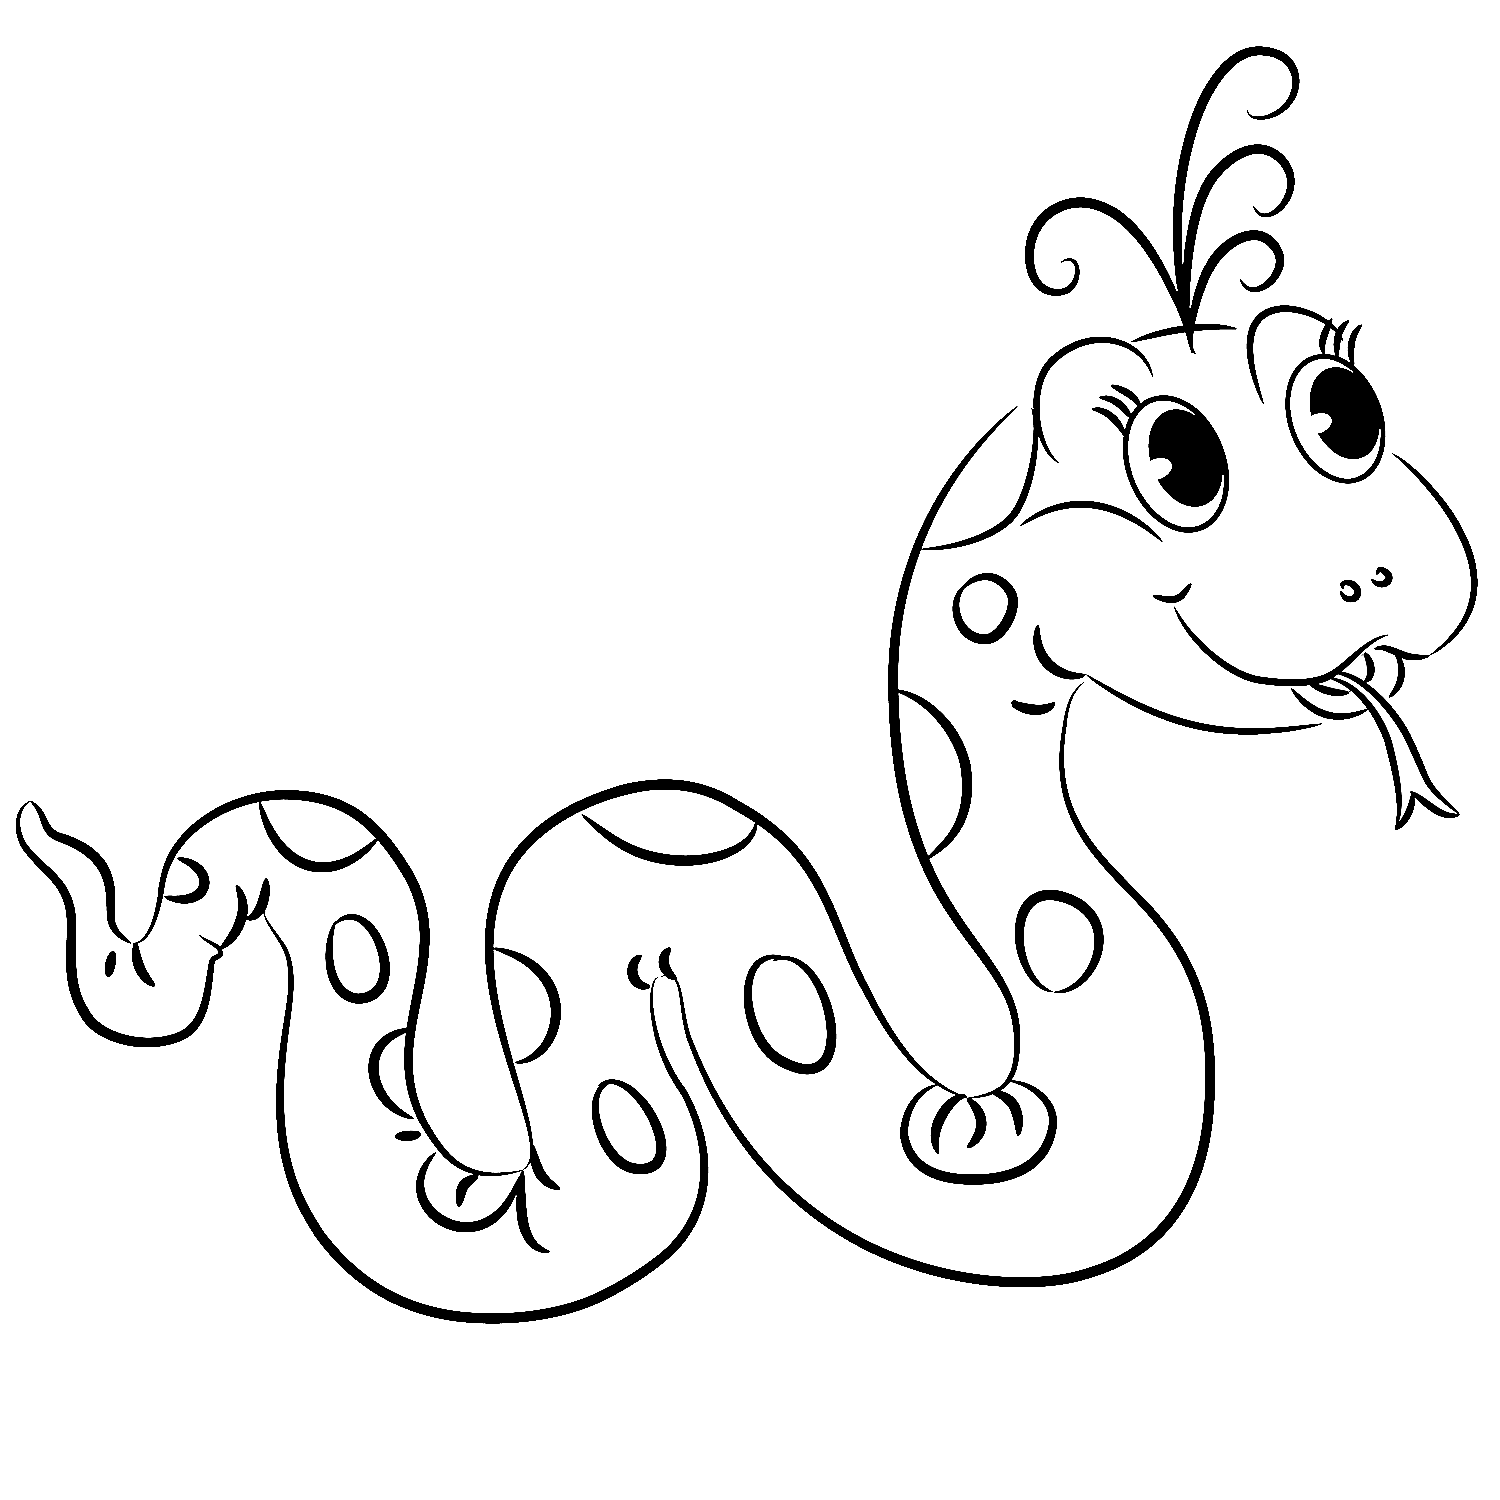 Snake Coloring Pages - Animals ColoringPedia